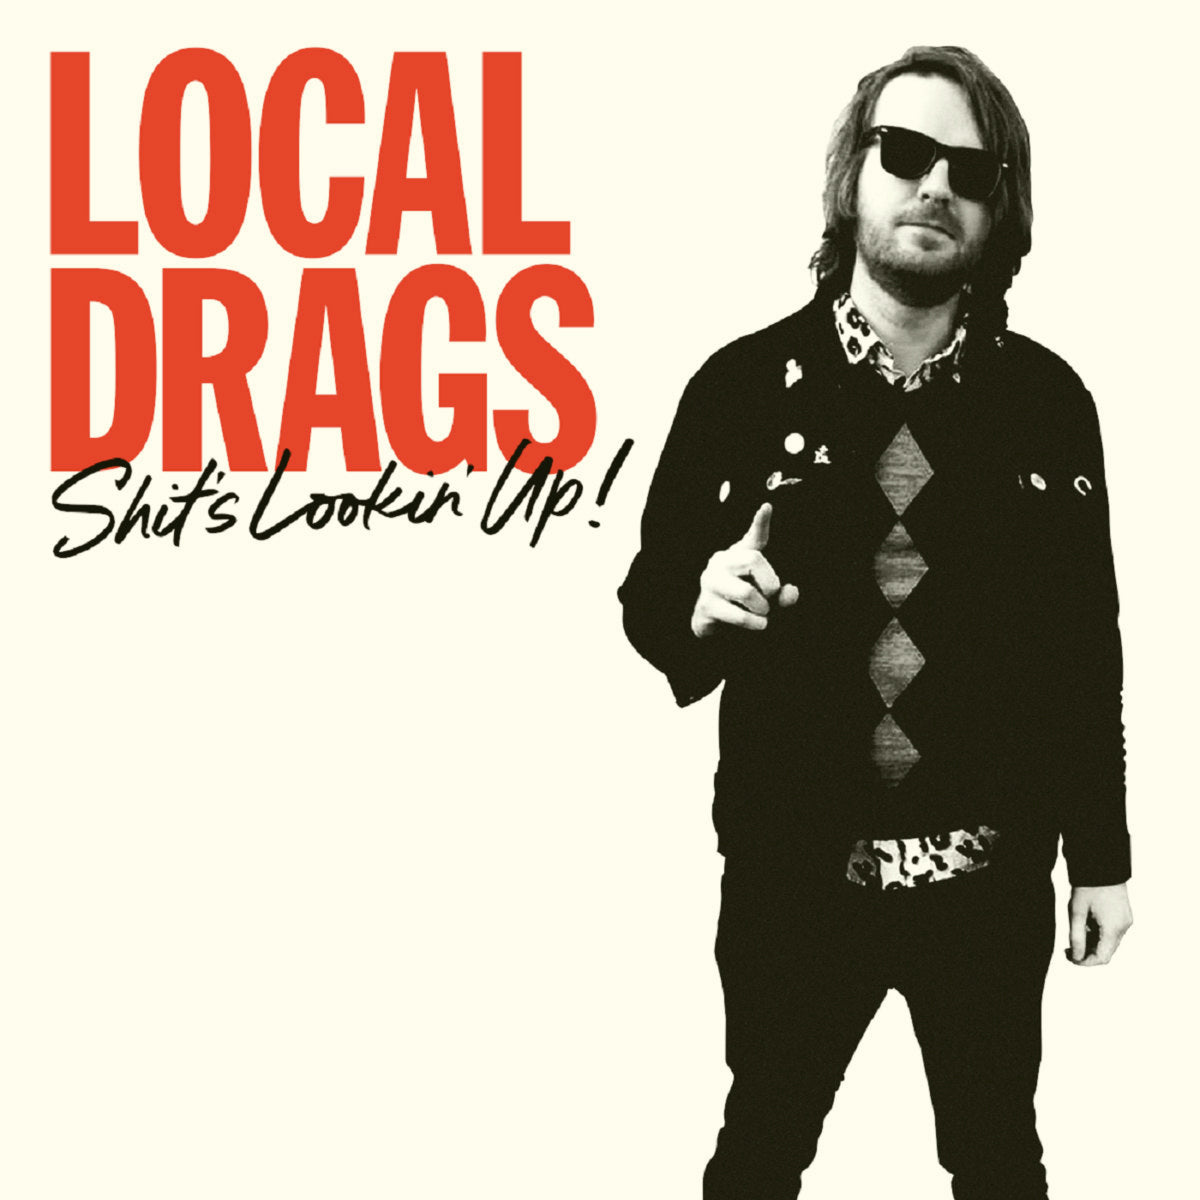 Local Drags- Shit’s Lookin’ Up LP ~EX  STARTER JACKETS / REPLACEMENTS!